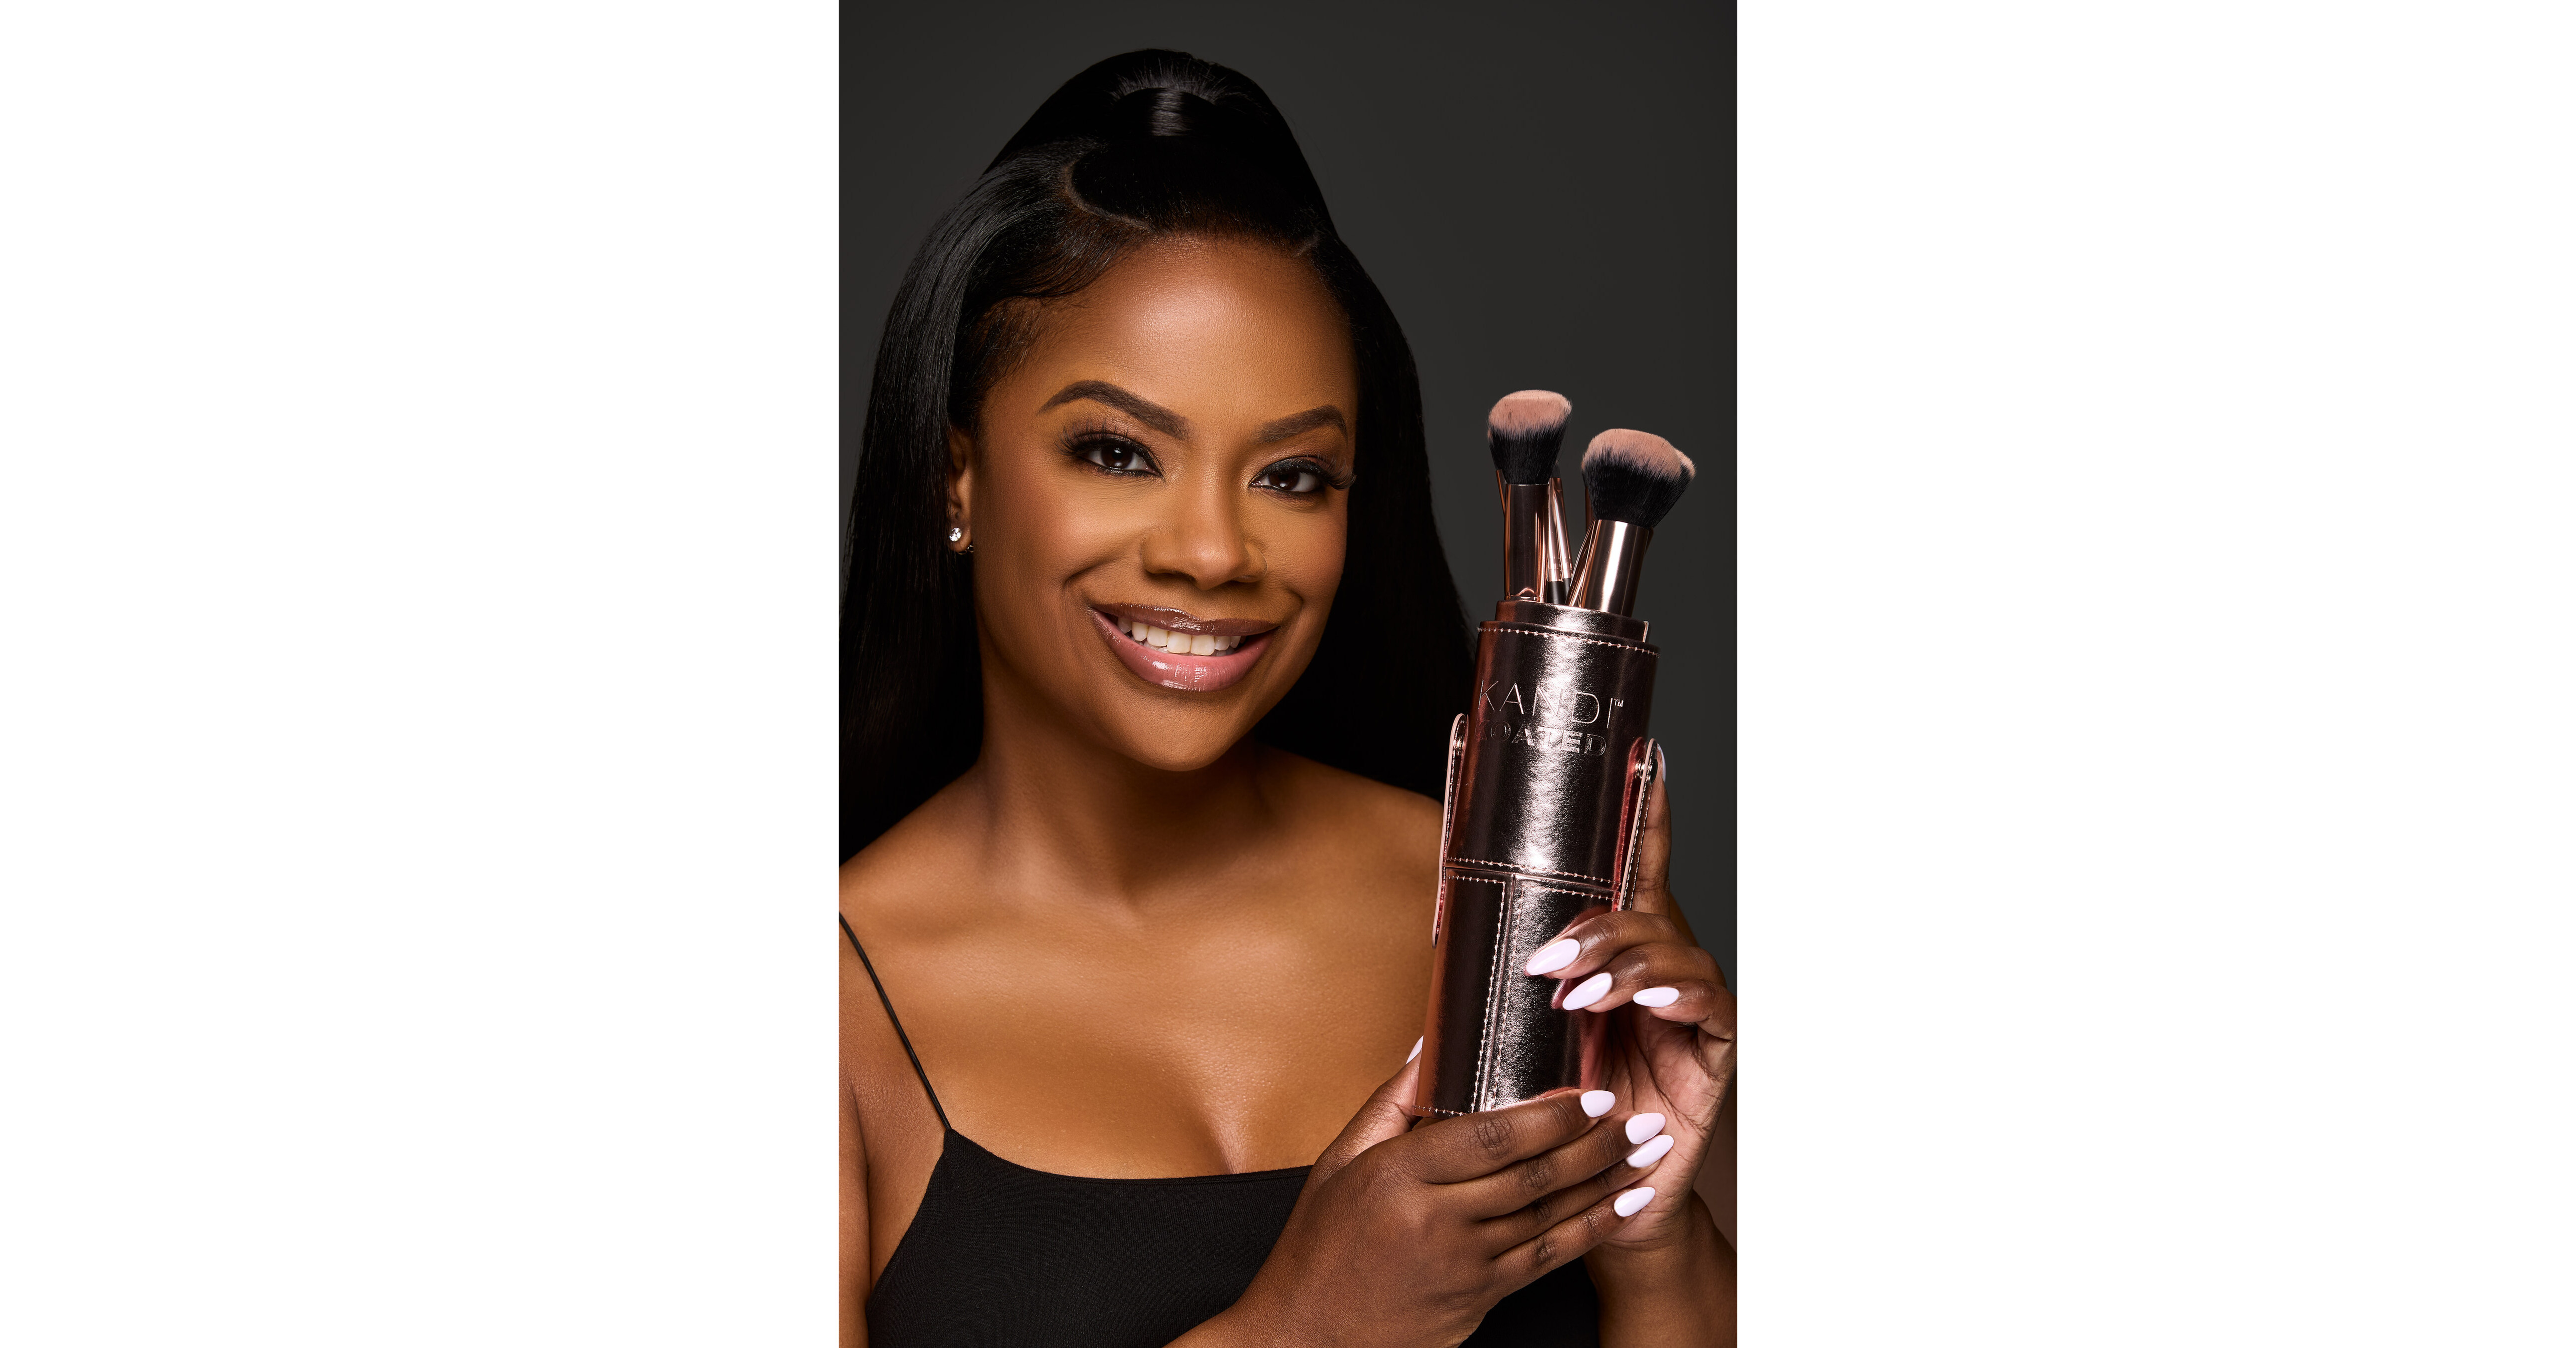 KANDI BURRUSS COLLABORATES WITH AMAZON TO EXPAND HER SUCCESSFUL COSMETICS, INTIMACY AND OTHER DISTINCTIVE PRODUCT LINES TO CUSTOMERS VIA NEWLY LAUNCHED STOREFRONT